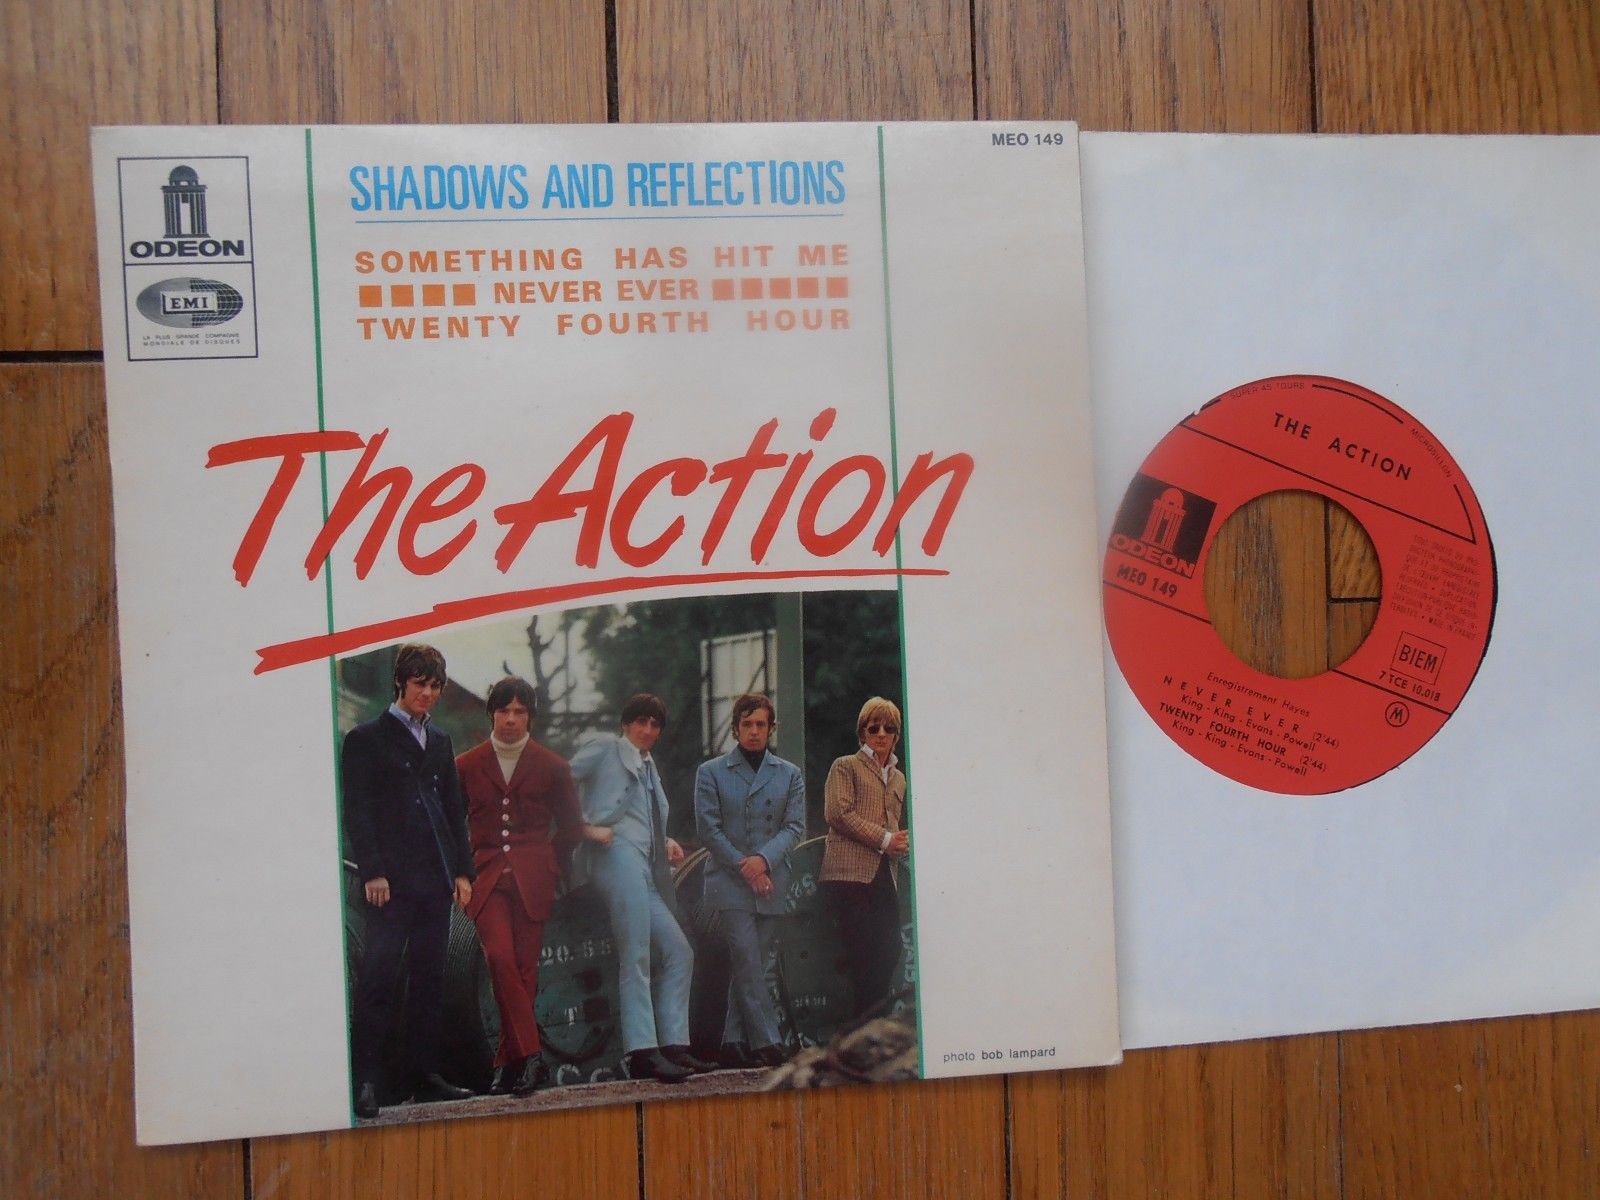 TOP FRENCH EP THE ACTION : Shadows and Reflexions ODEON MEO 149  MOD/PSYCH EX+